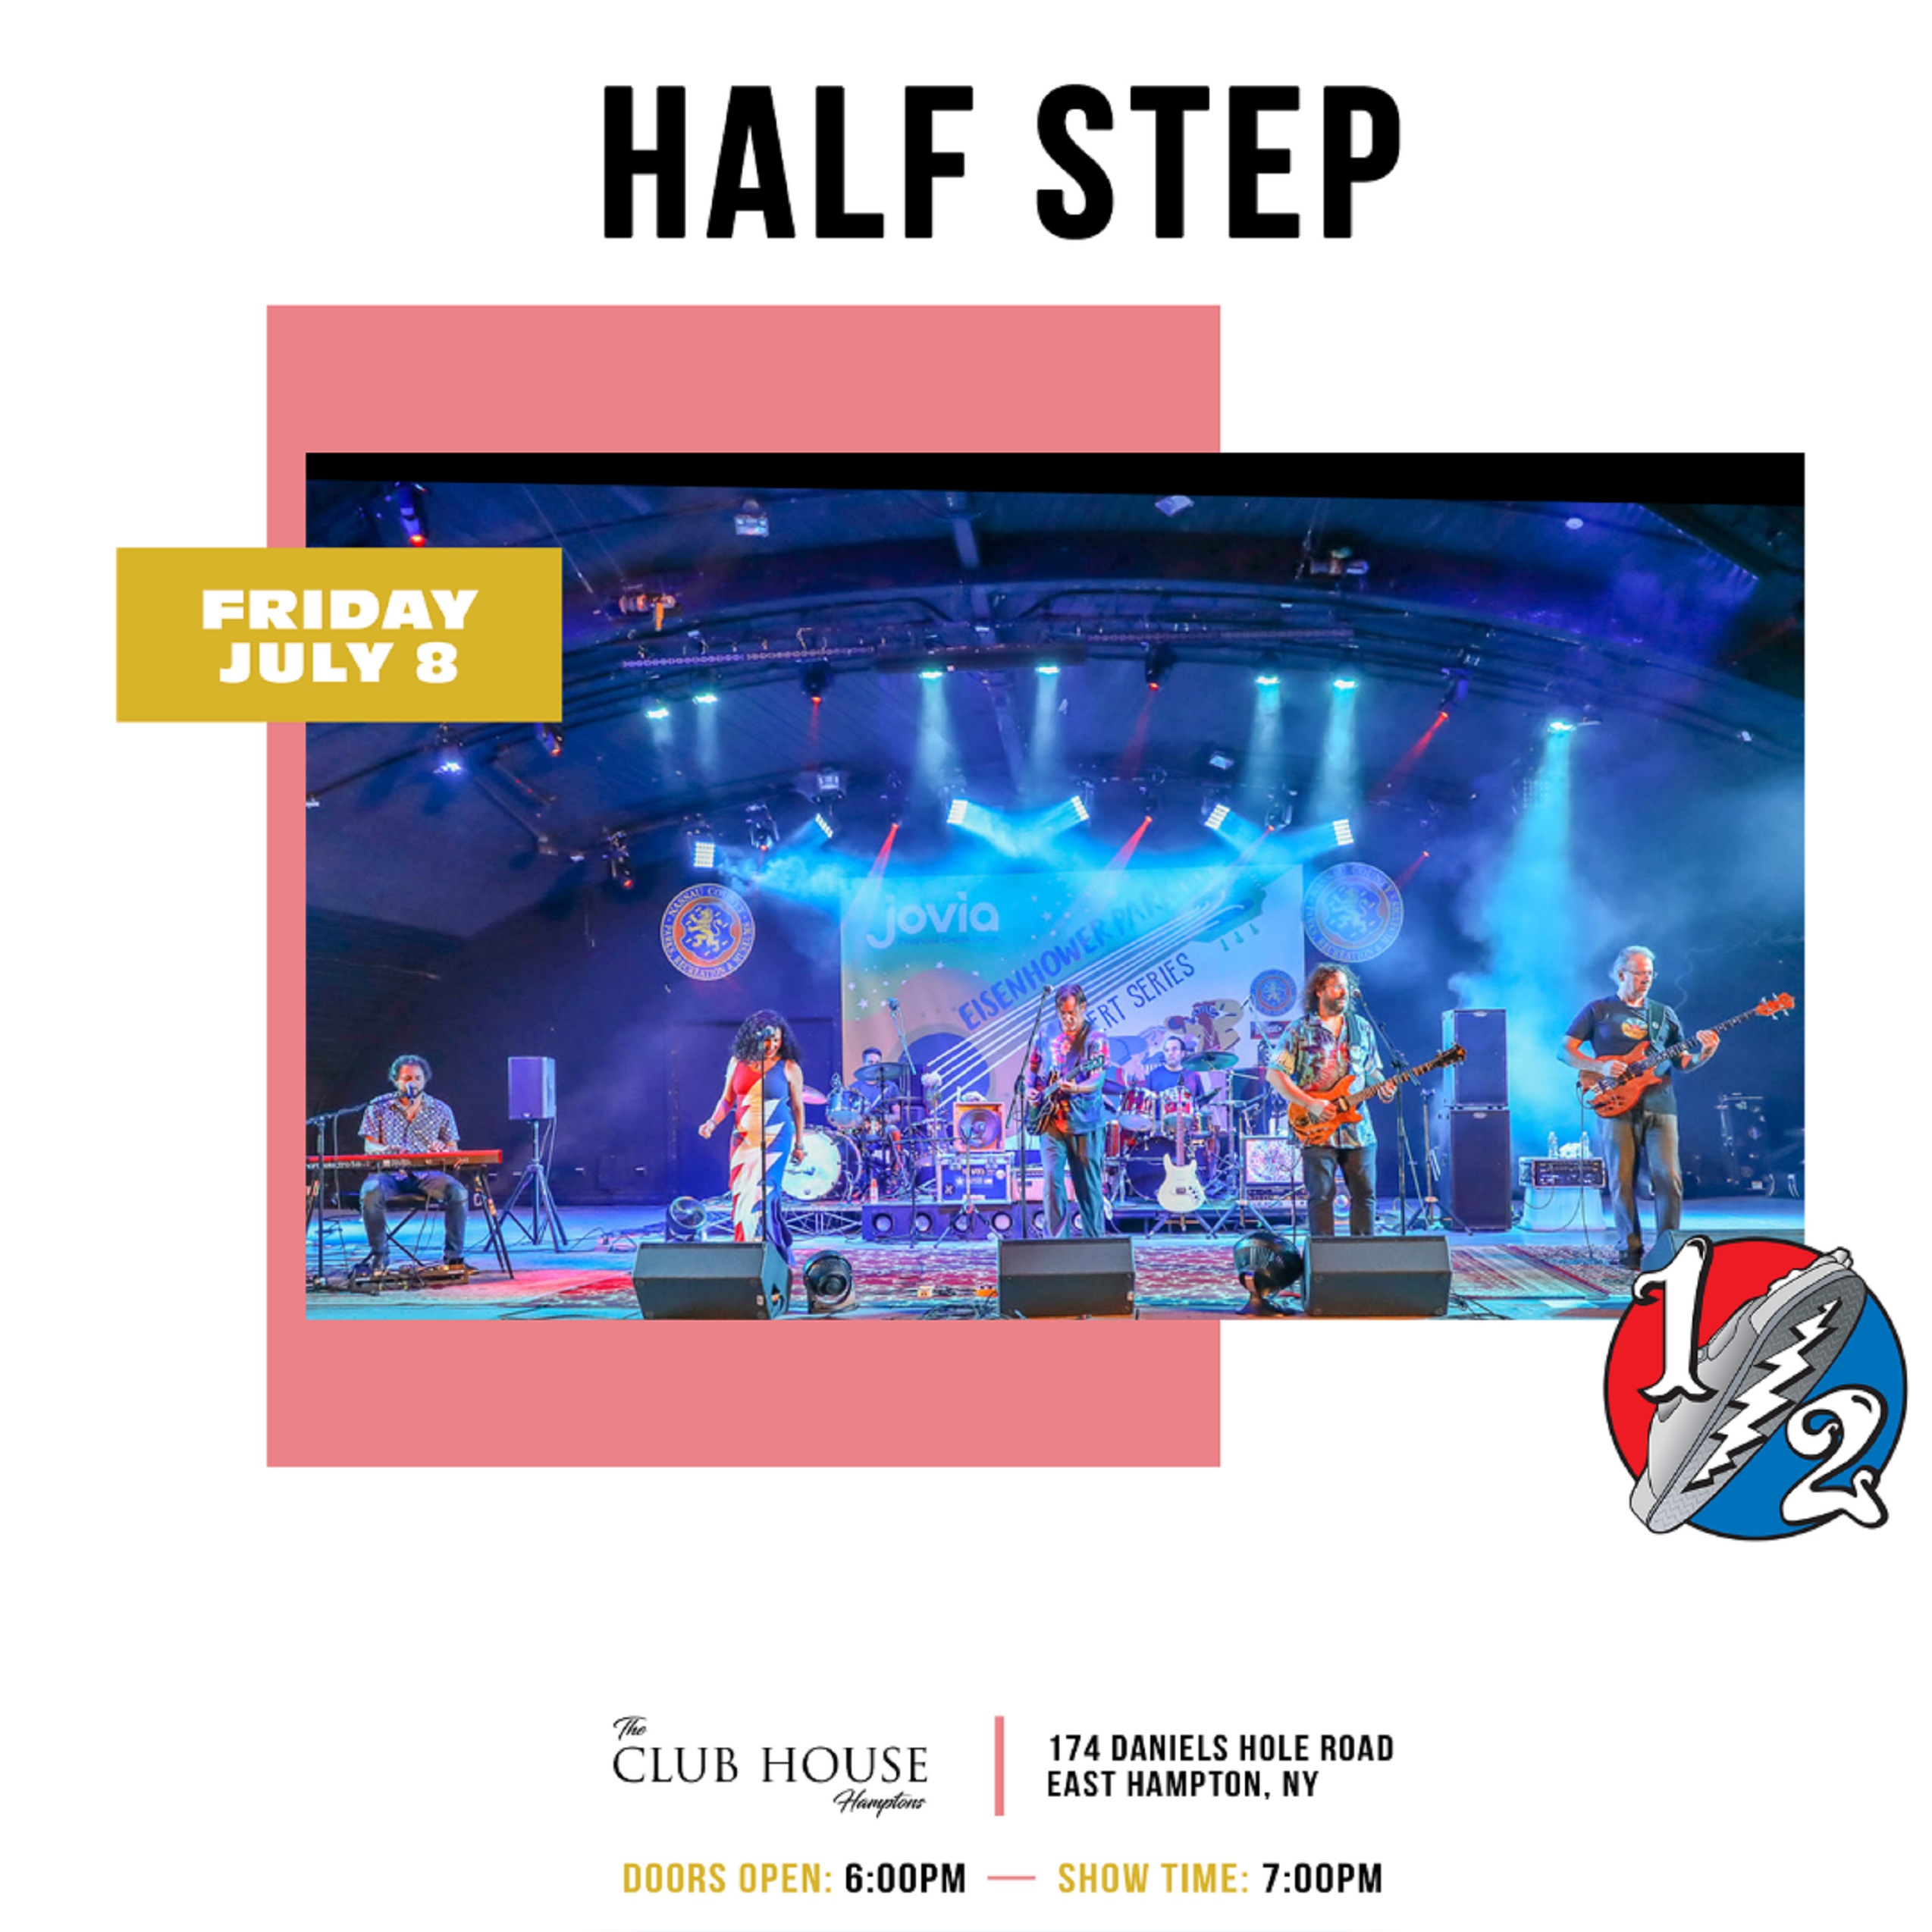 Catch Half Step in East Hampton on July 8th, 2022